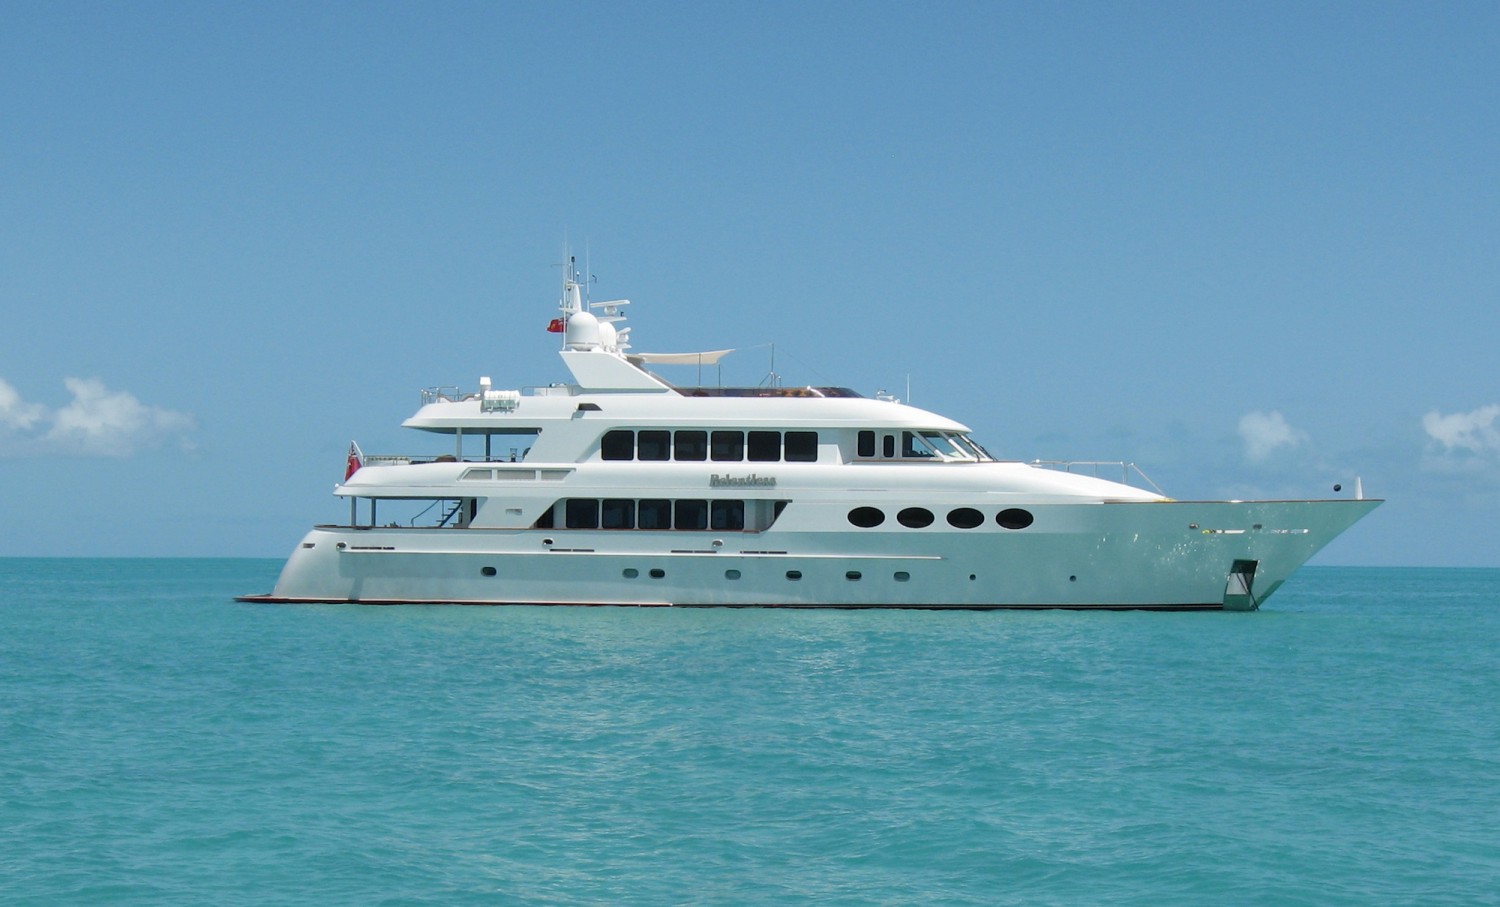 New charter CA listing for M/Y RELENTLESS with YACHTZOO